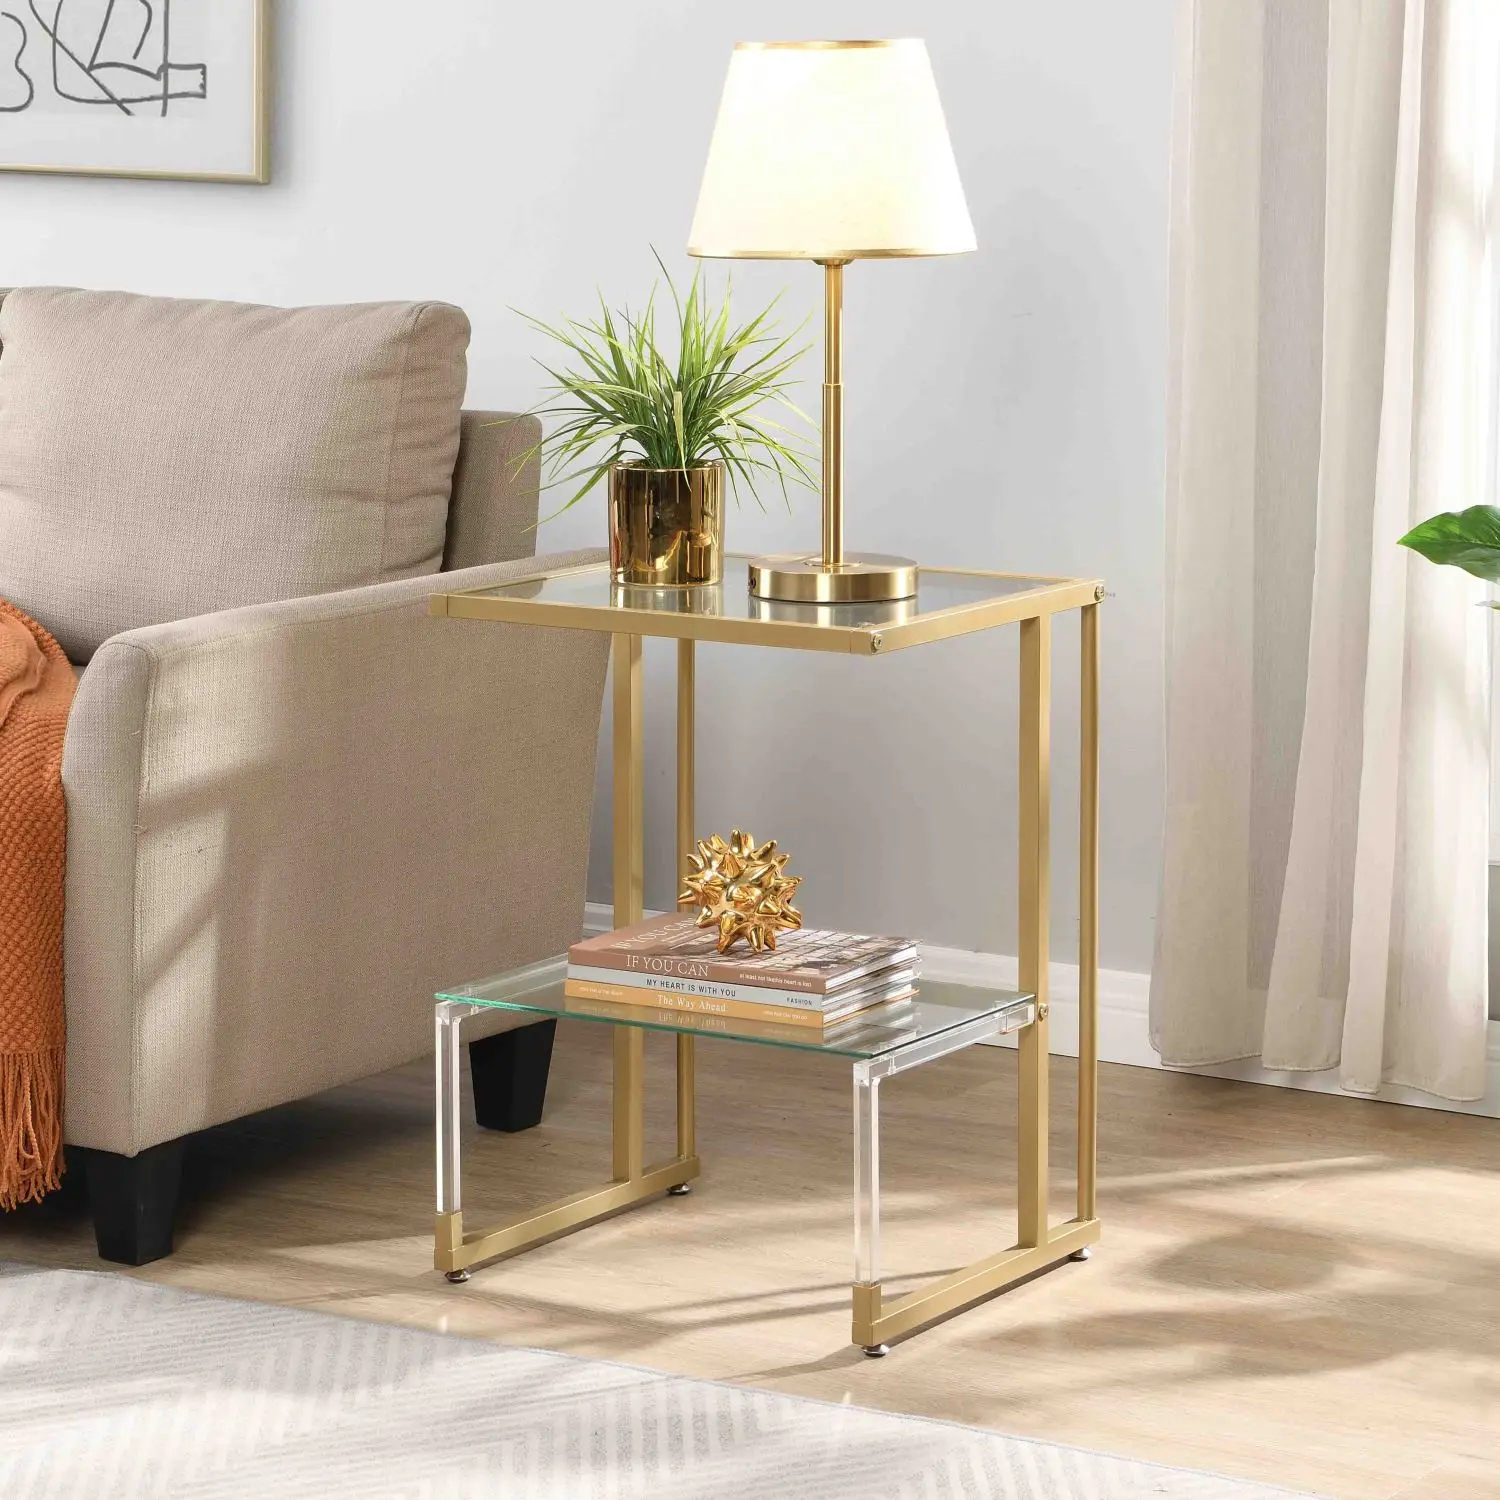 

Luxurious Golden 2-Tier Acrylic Glass Side Table Perfect for Living Room and Bedroom Décor